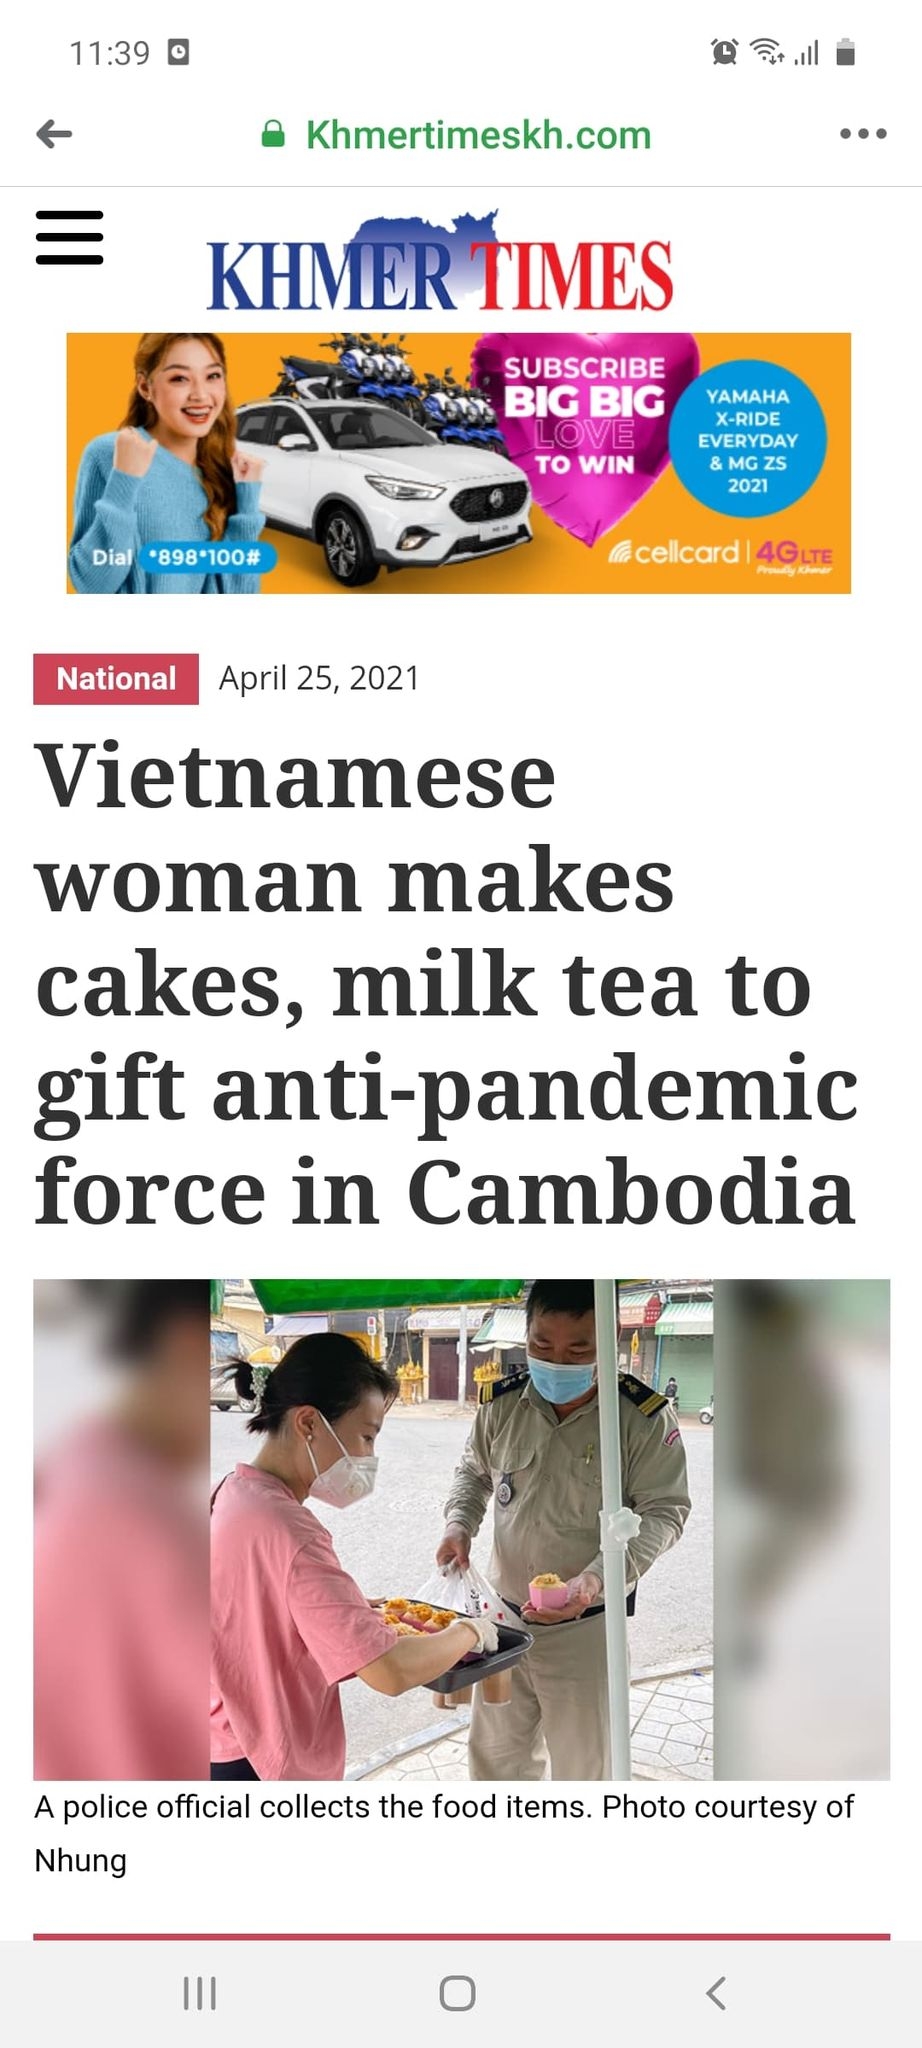 Cambodia newspaper highlights Vietnamese women’s good deeds to local anti-pandemic force